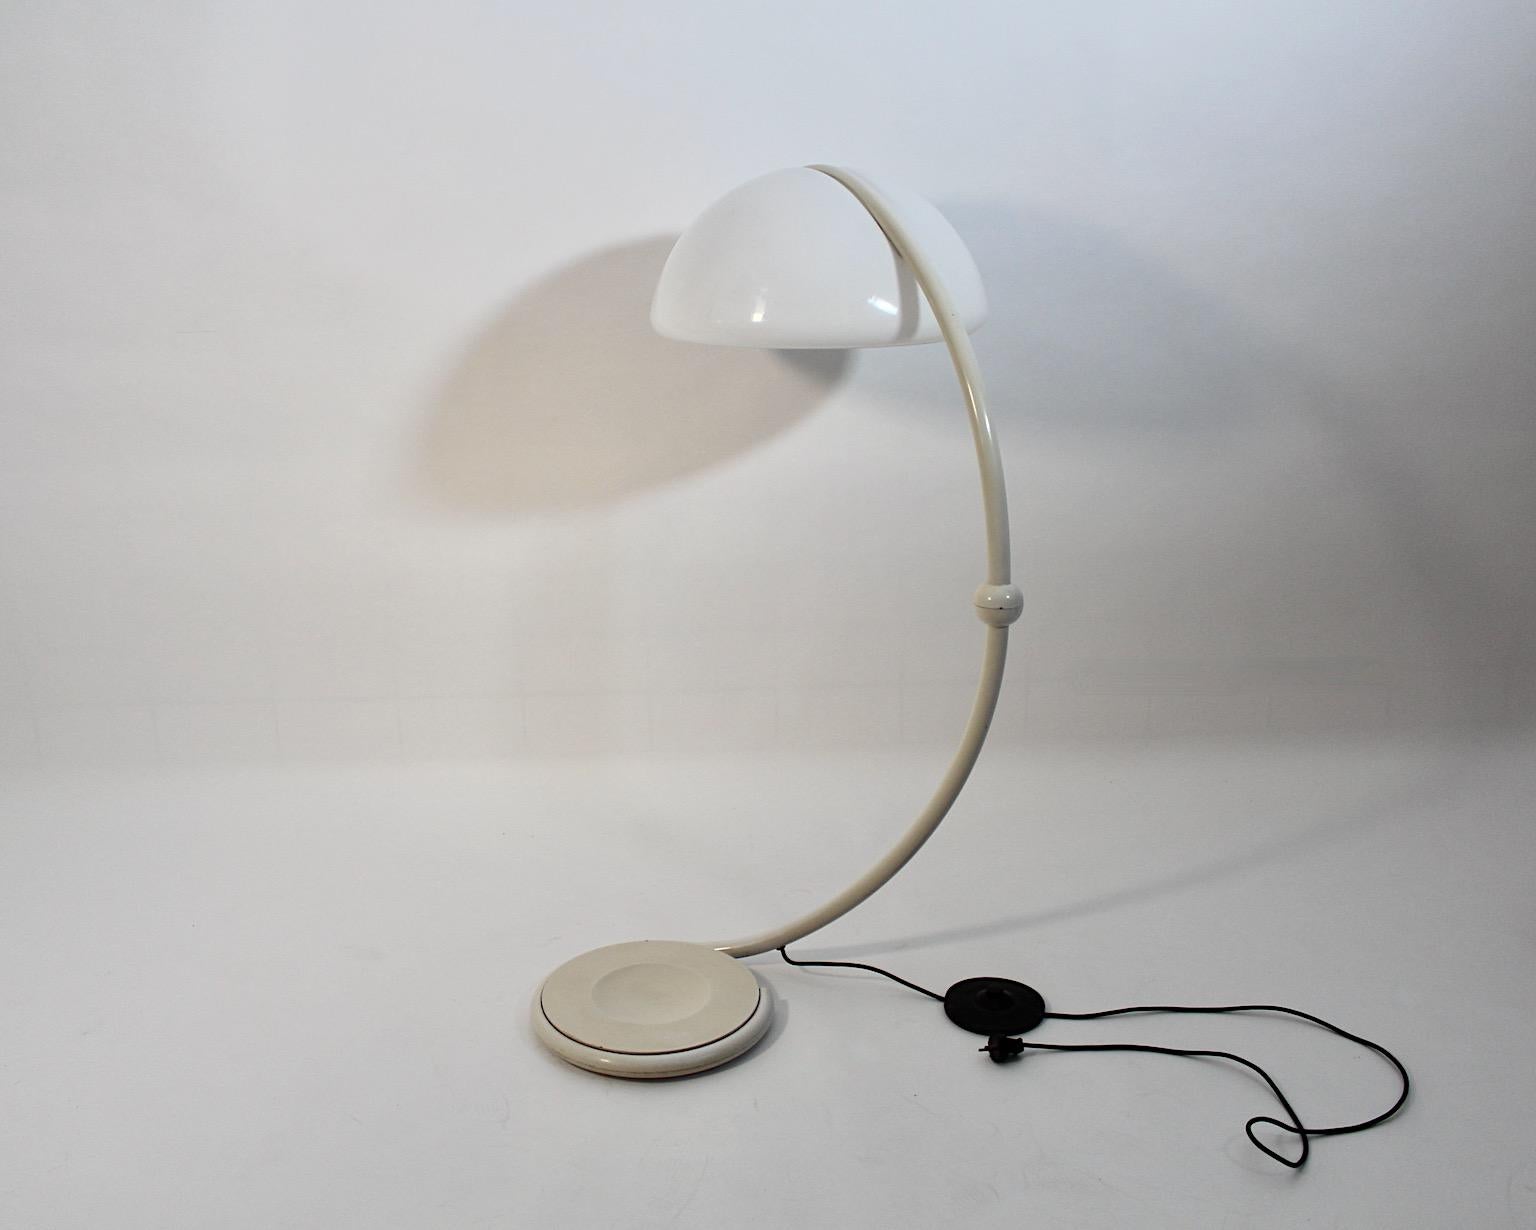 Space Age Vintage Floor Lamp White Plastic Metal Elio Martinelli 1970s Italy For Sale 2